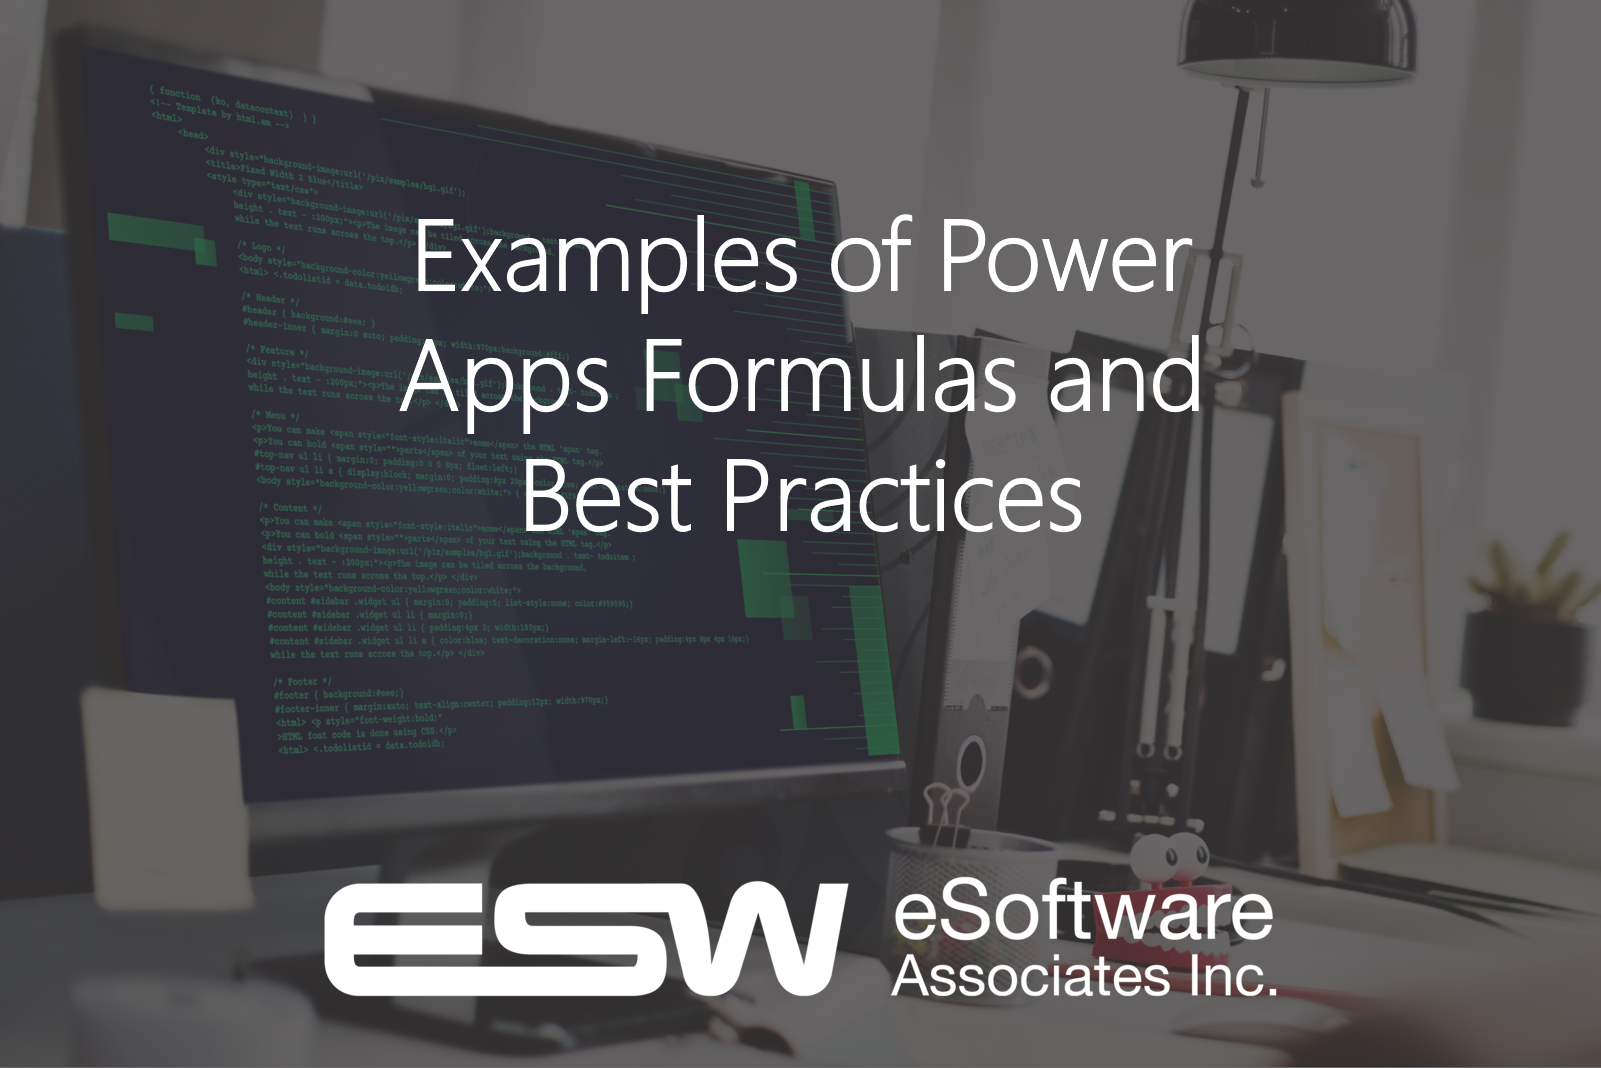 See Examples of Microsoft Power Apps Formulas and Best Practices